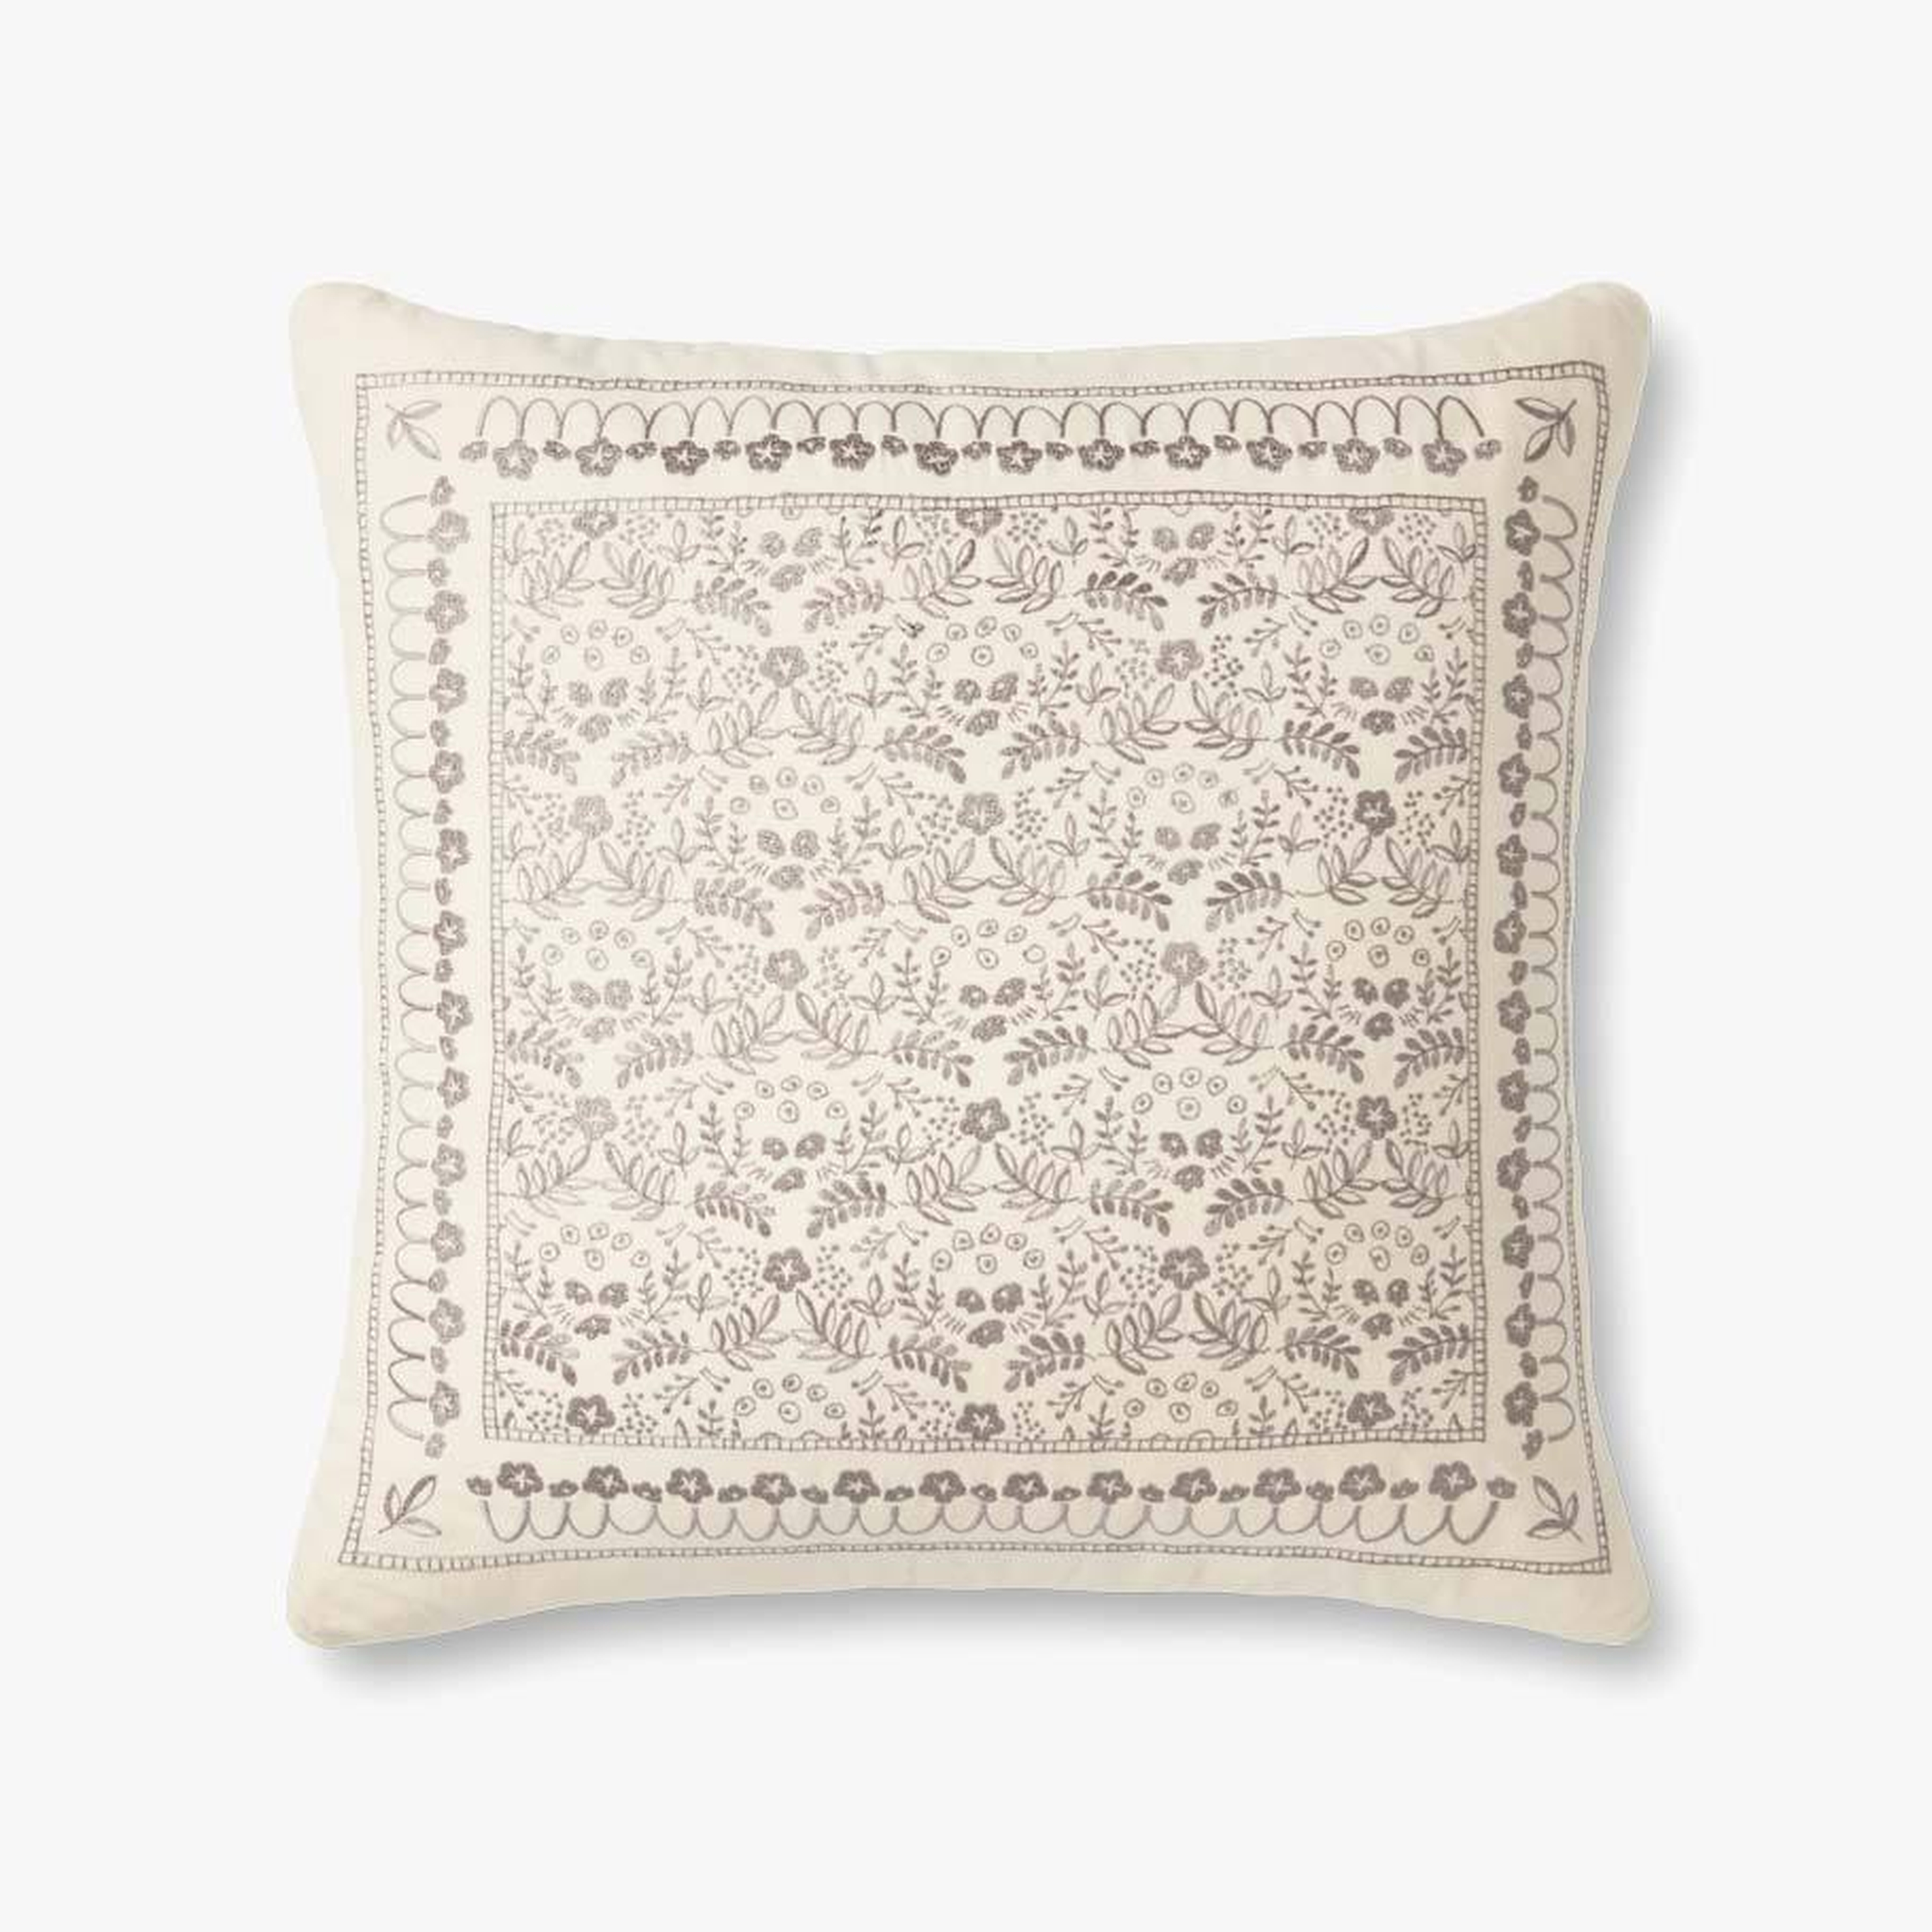 Rifle Paper Co. × Loloi Throw Pillow with Poly FIll, Ivory & Gray, 22" x 22" - Rifle Paper Co. x Loloi